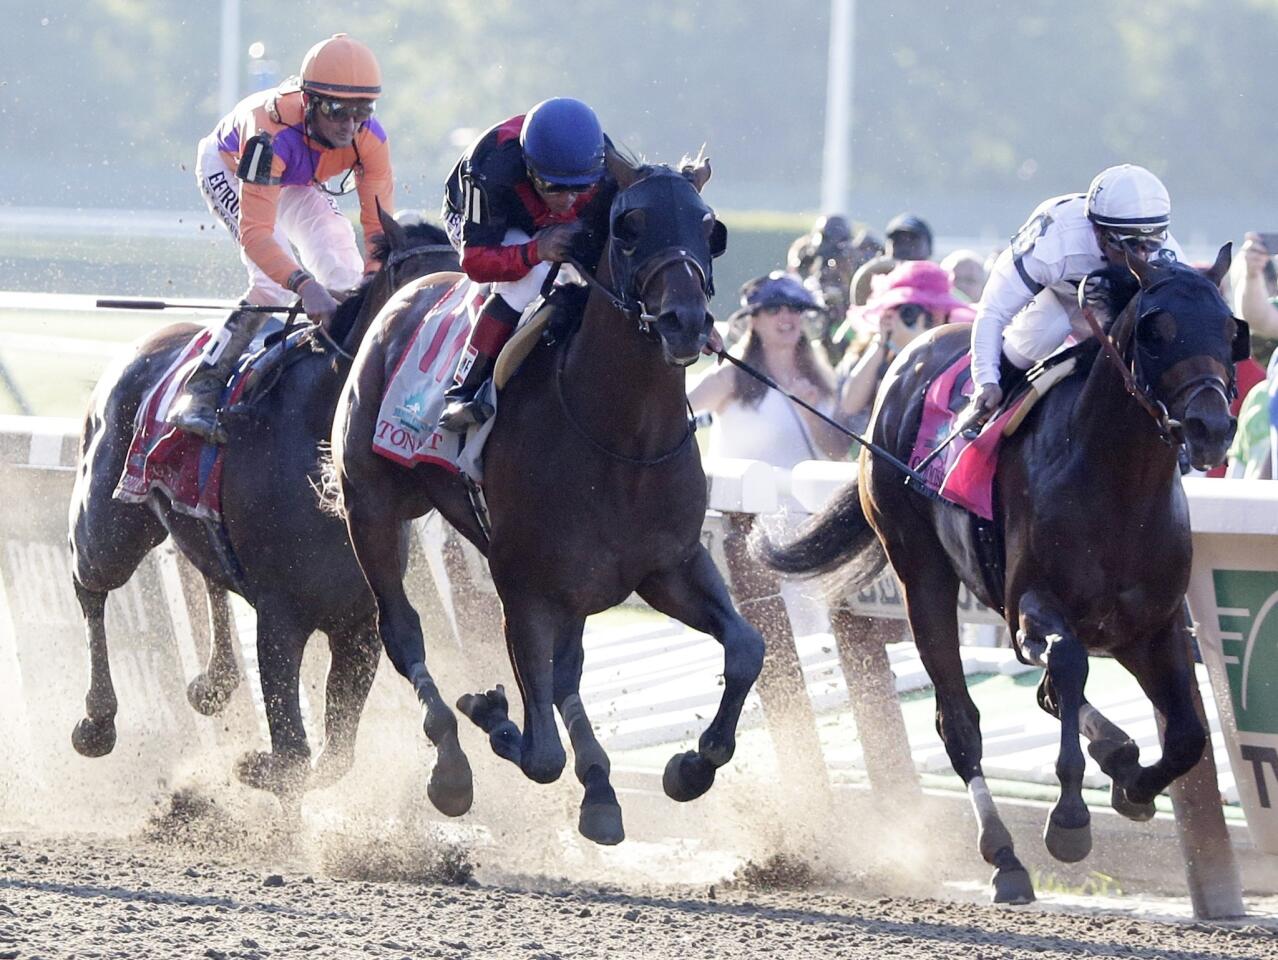 2014 Belmont Stakes